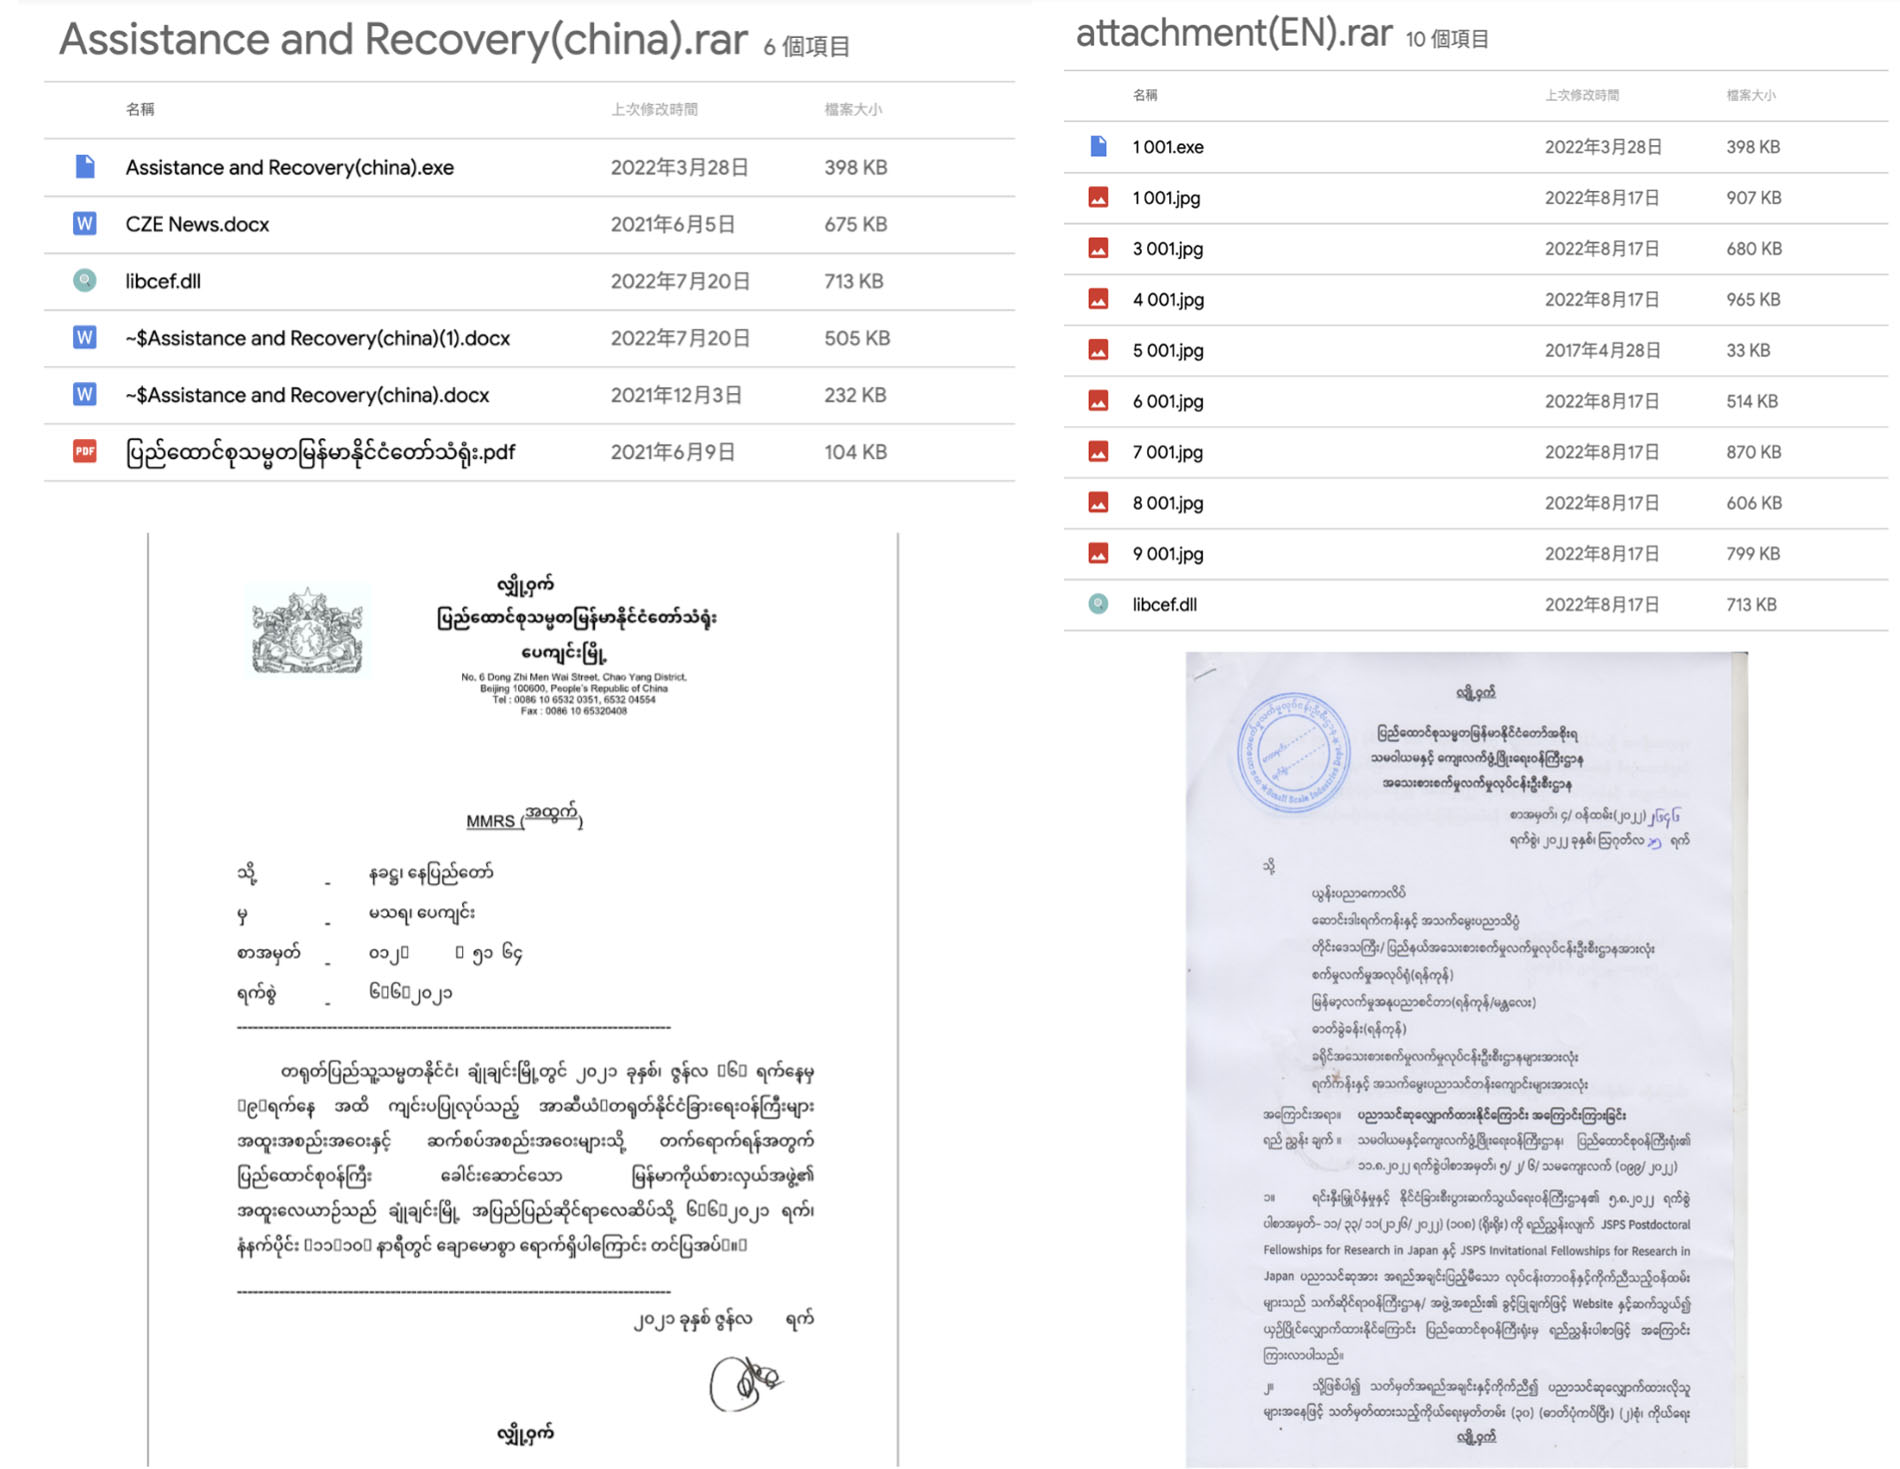 Figure 5. Sample decoy documents relating to government meetings (left) and overseas research exchange (right)